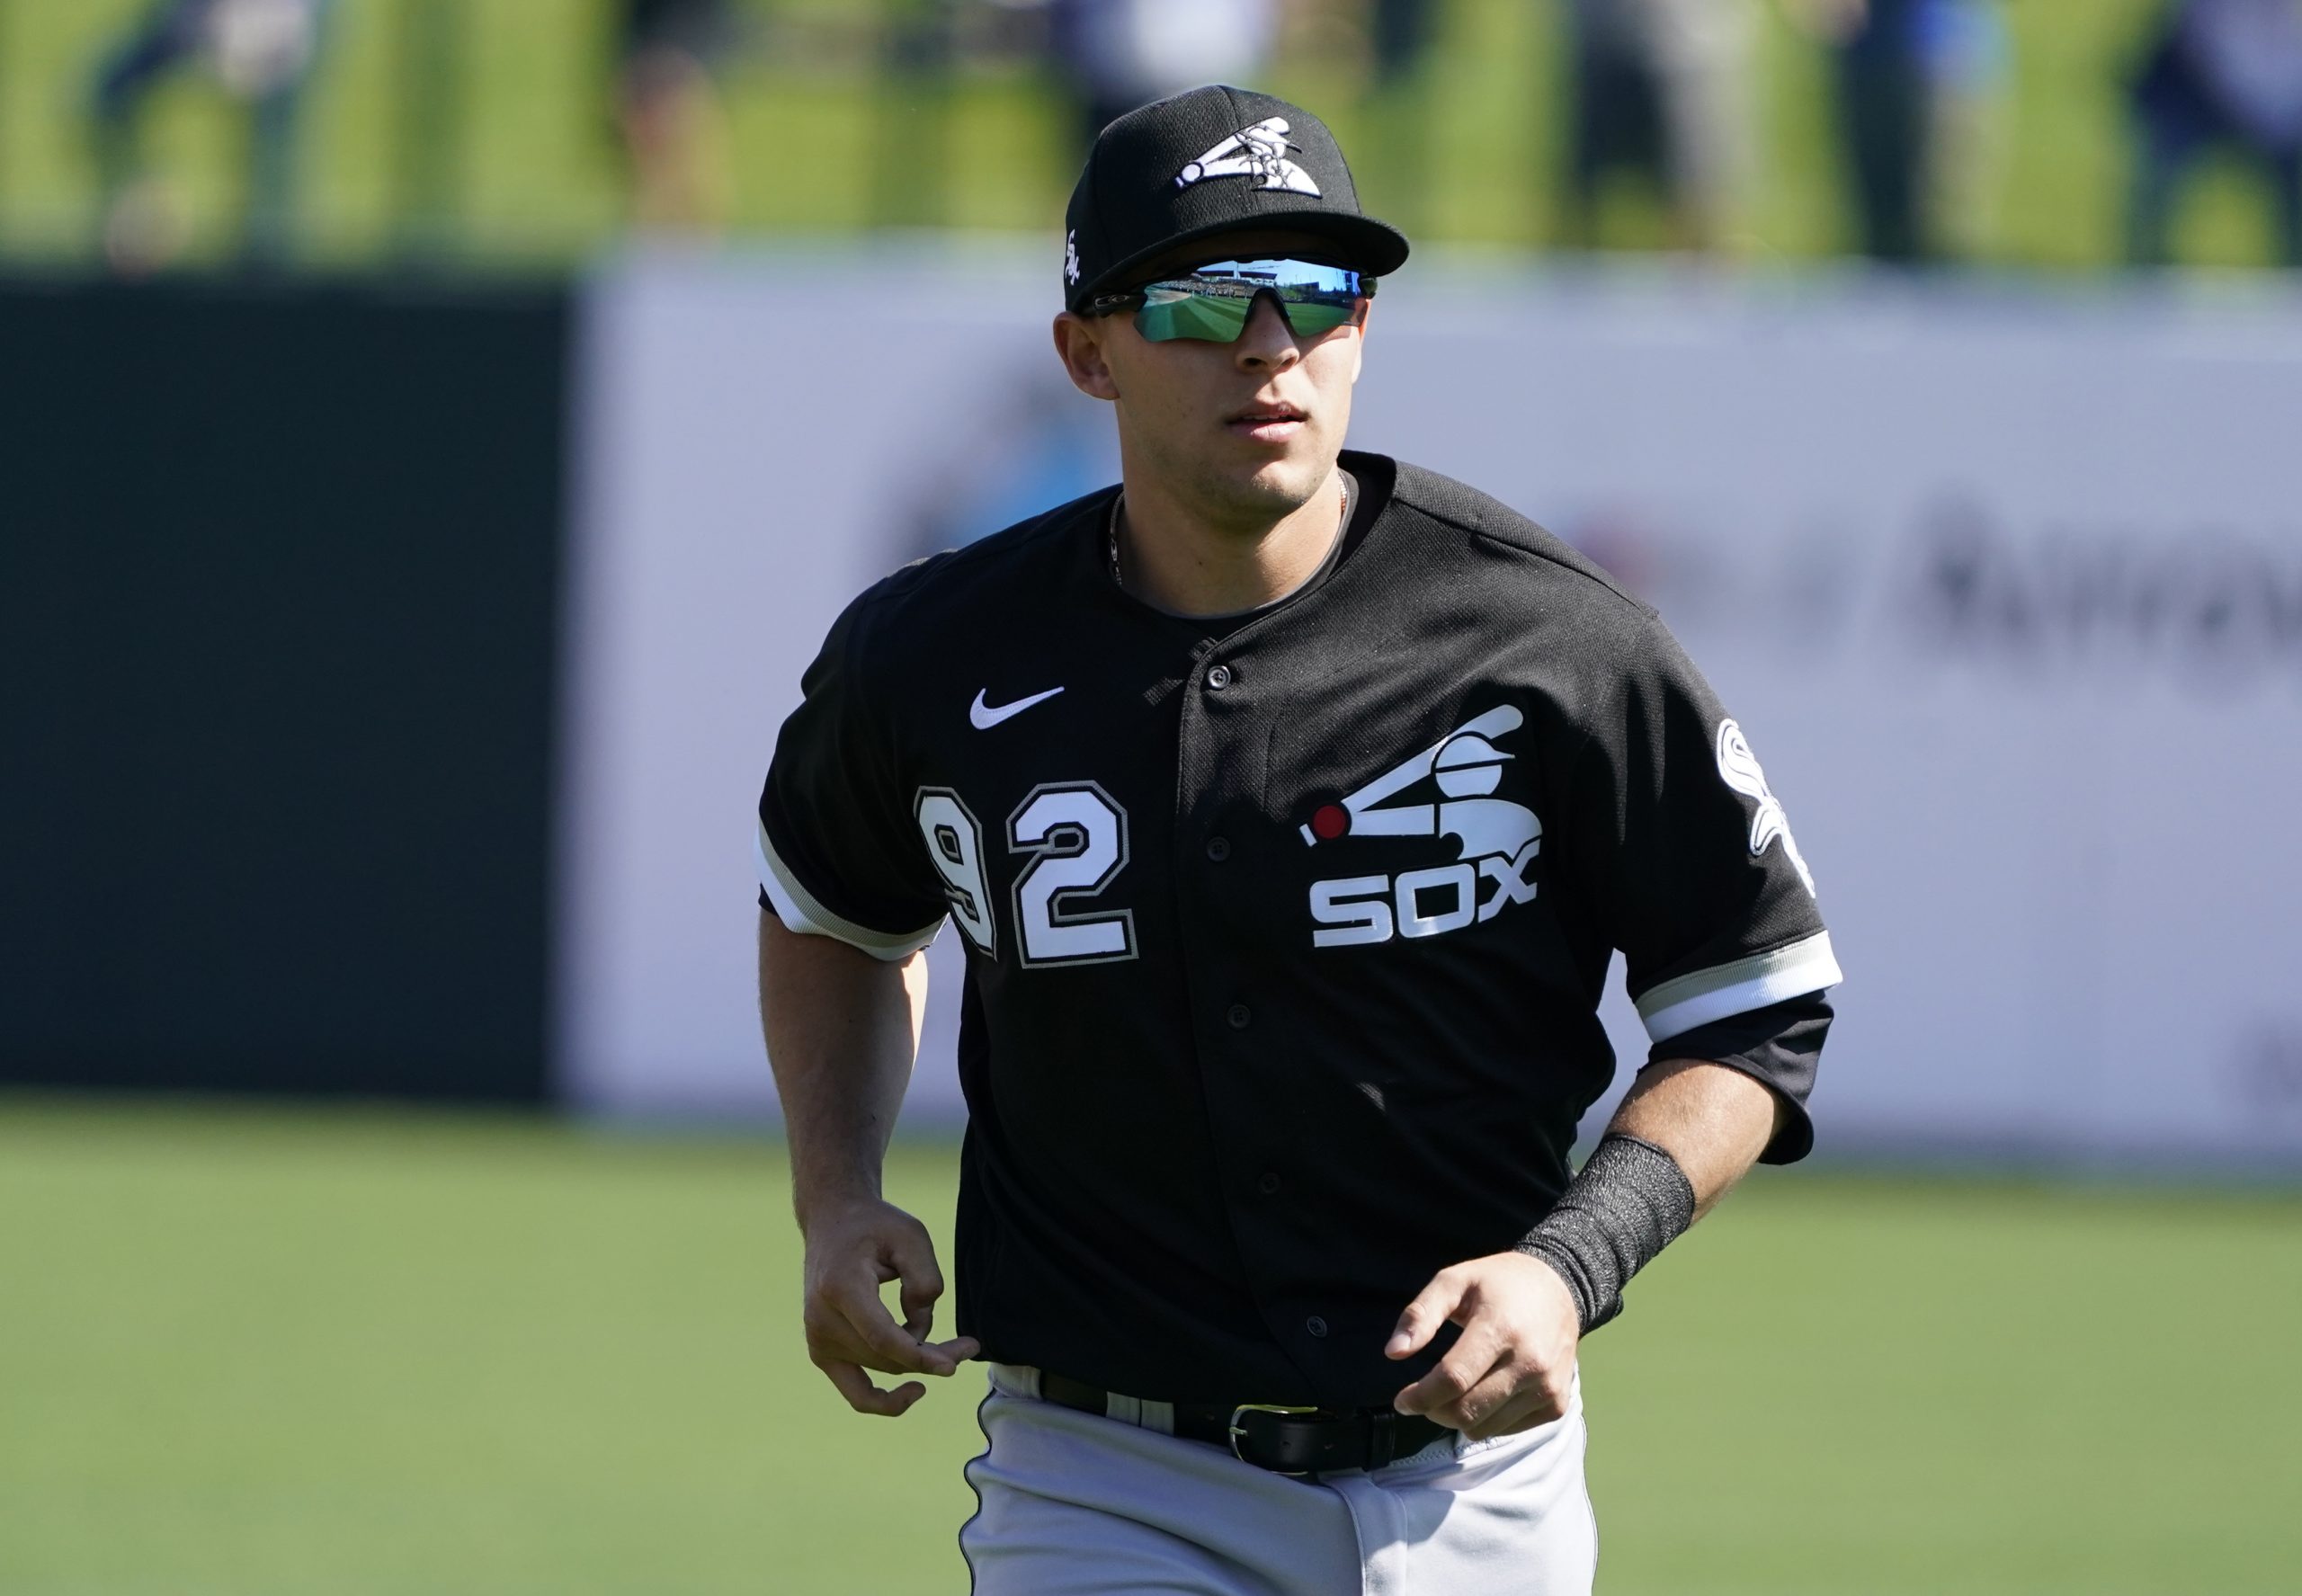 South Side Sox Top Prospect No. 5: Nick Madrigal - South Side Sox